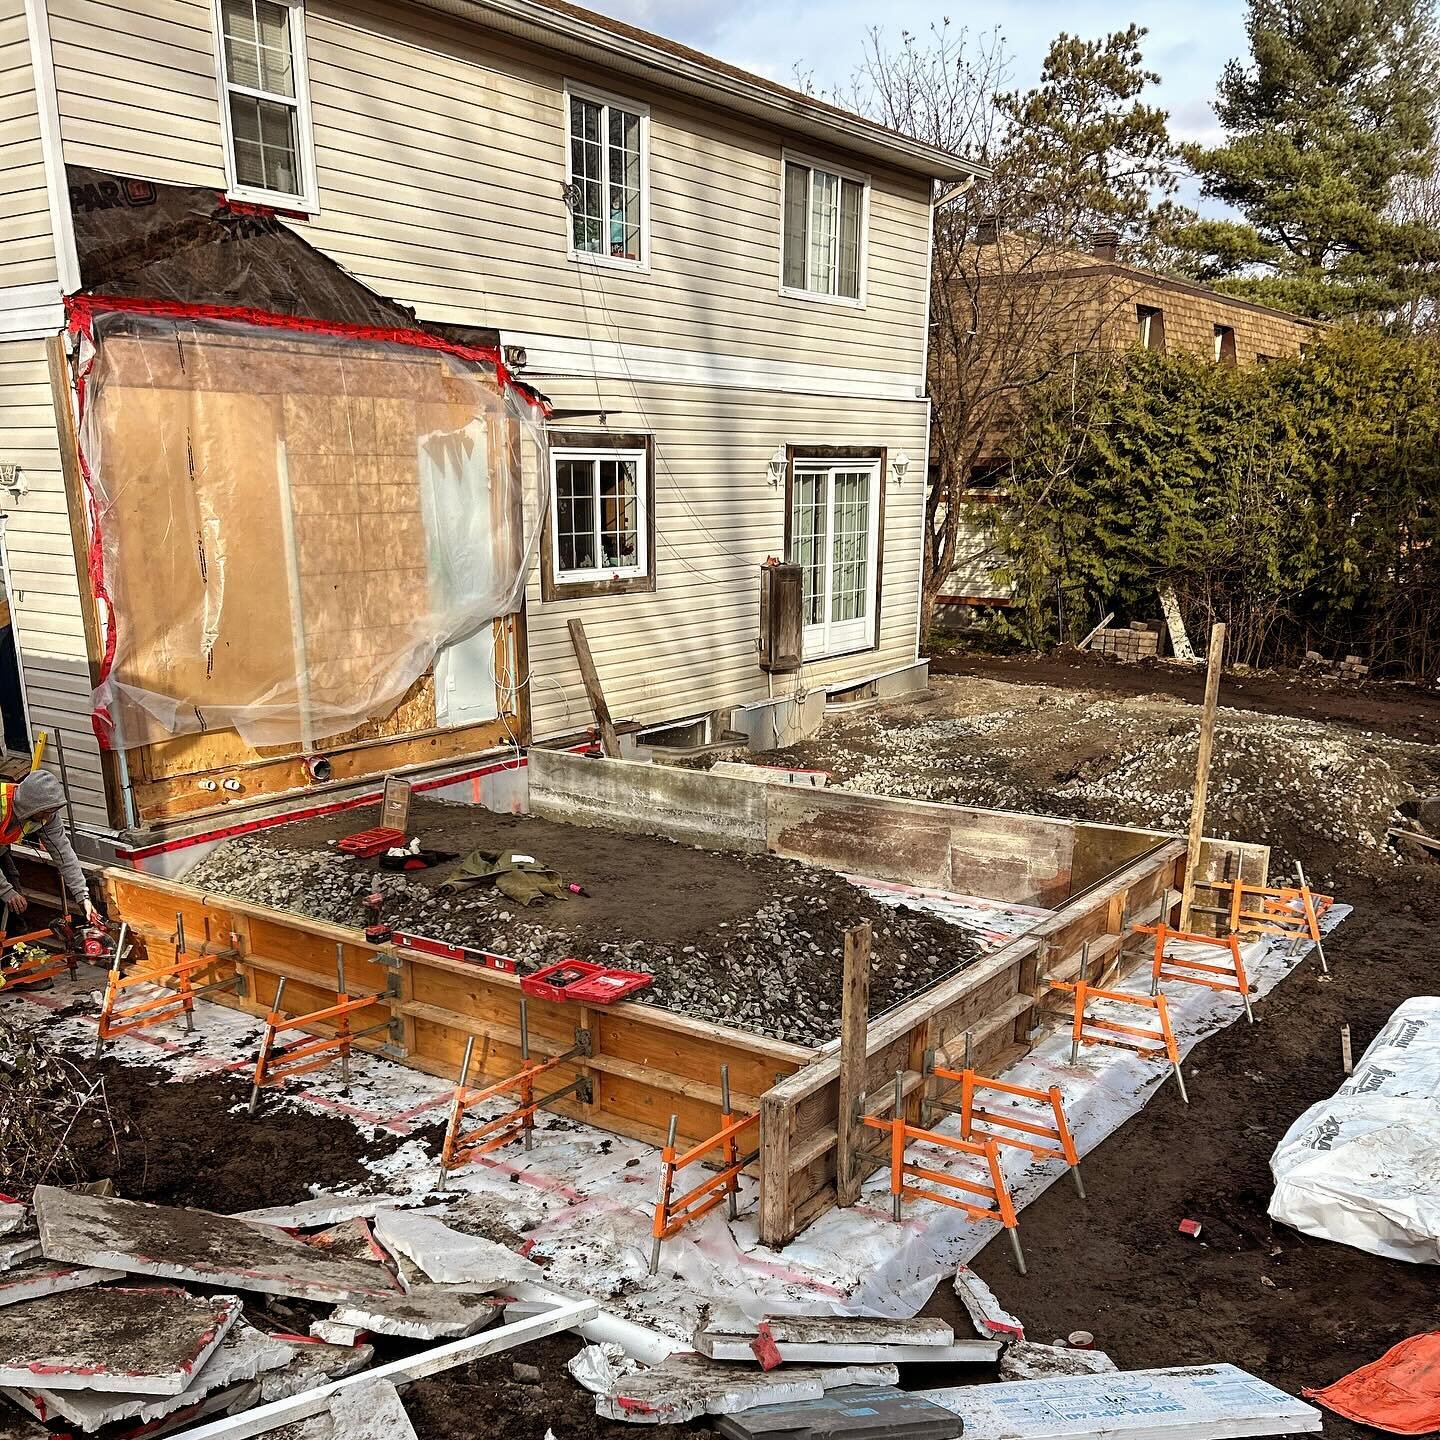 Monolithic slab preparations (wider footing than usual). Home addition @demarcoconstruction #construction #ottawa #ottawaconstruction